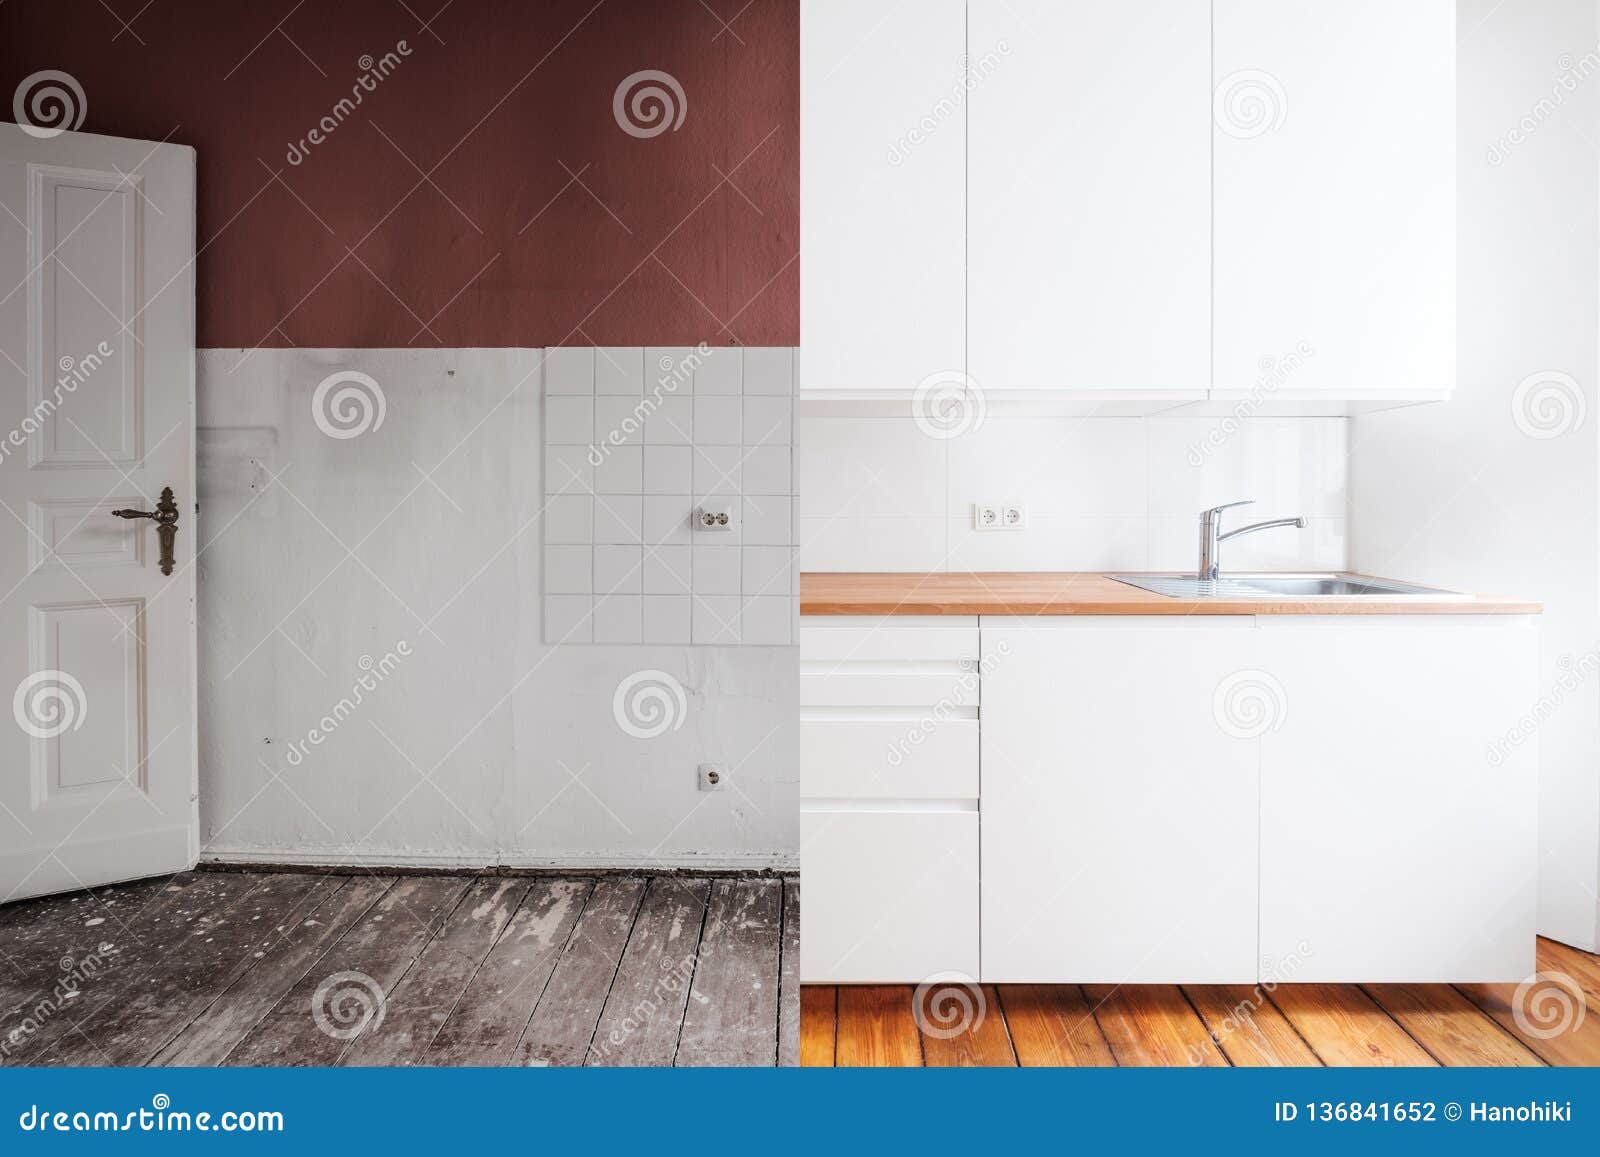 renovation concept -kitchen room before and after refurbishment or restoration